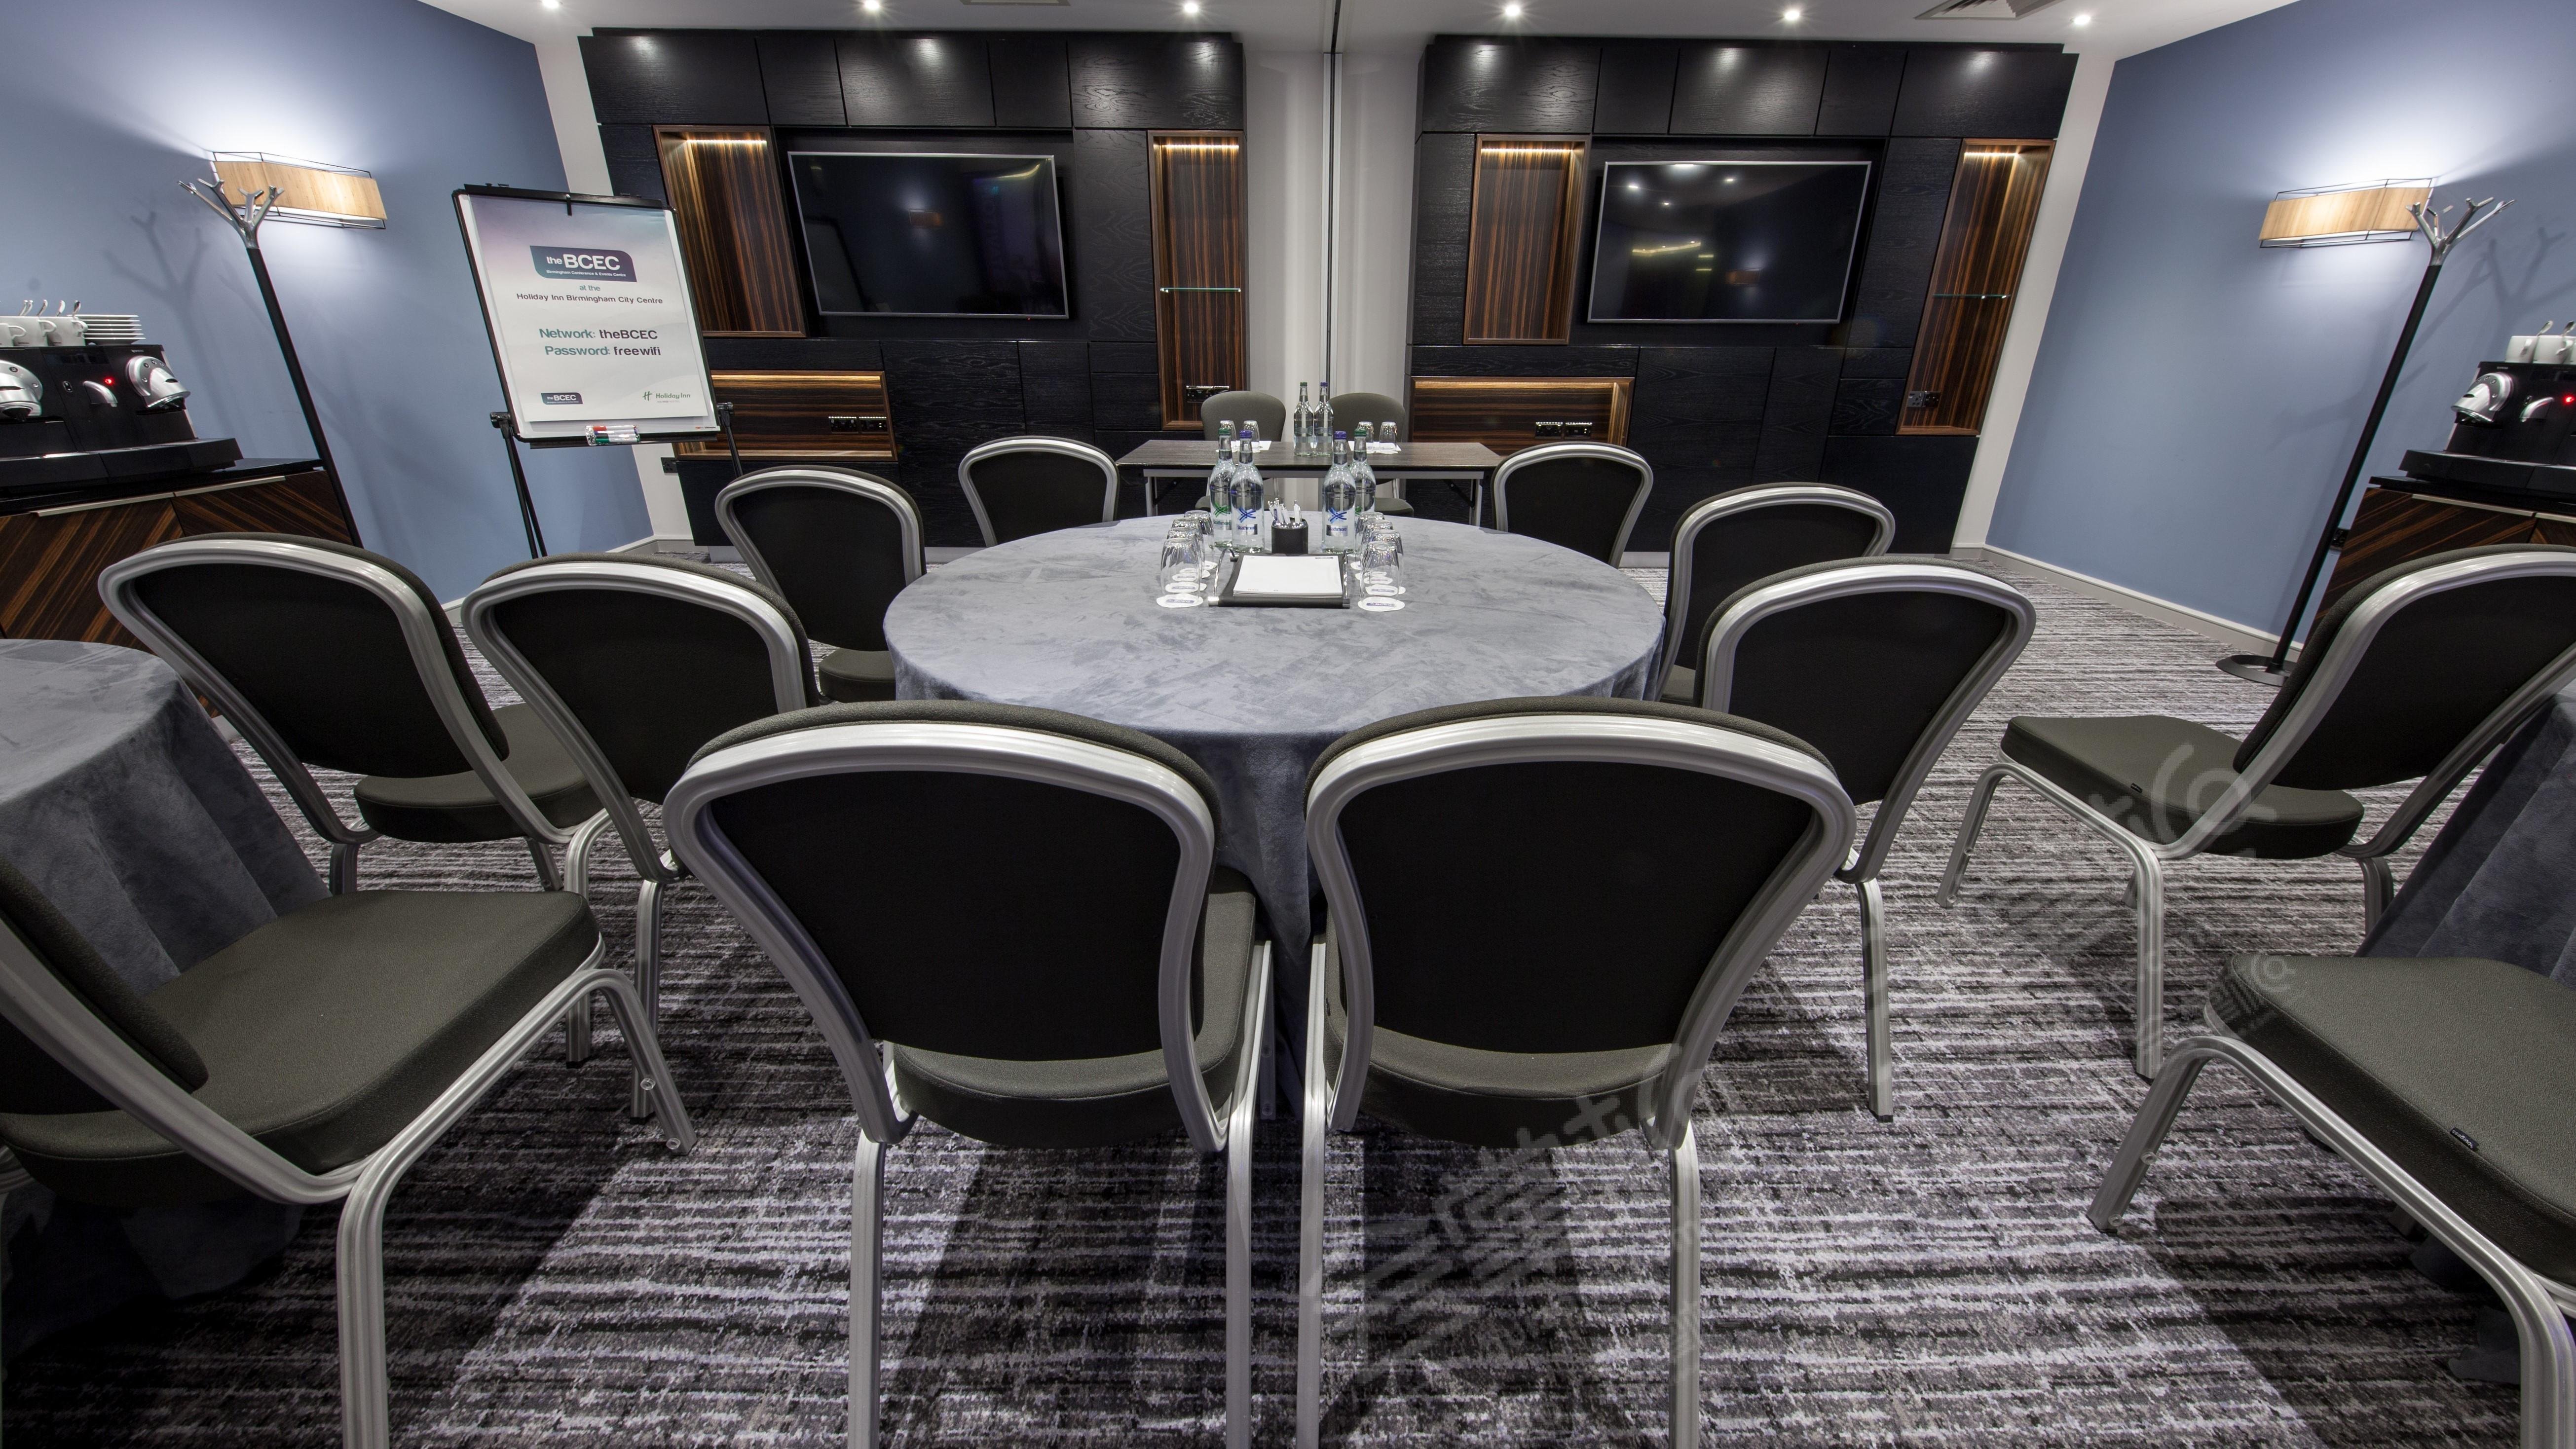 The Birmingham Conference and Events Centre at the Holiday Inn Birmingham City Centre14